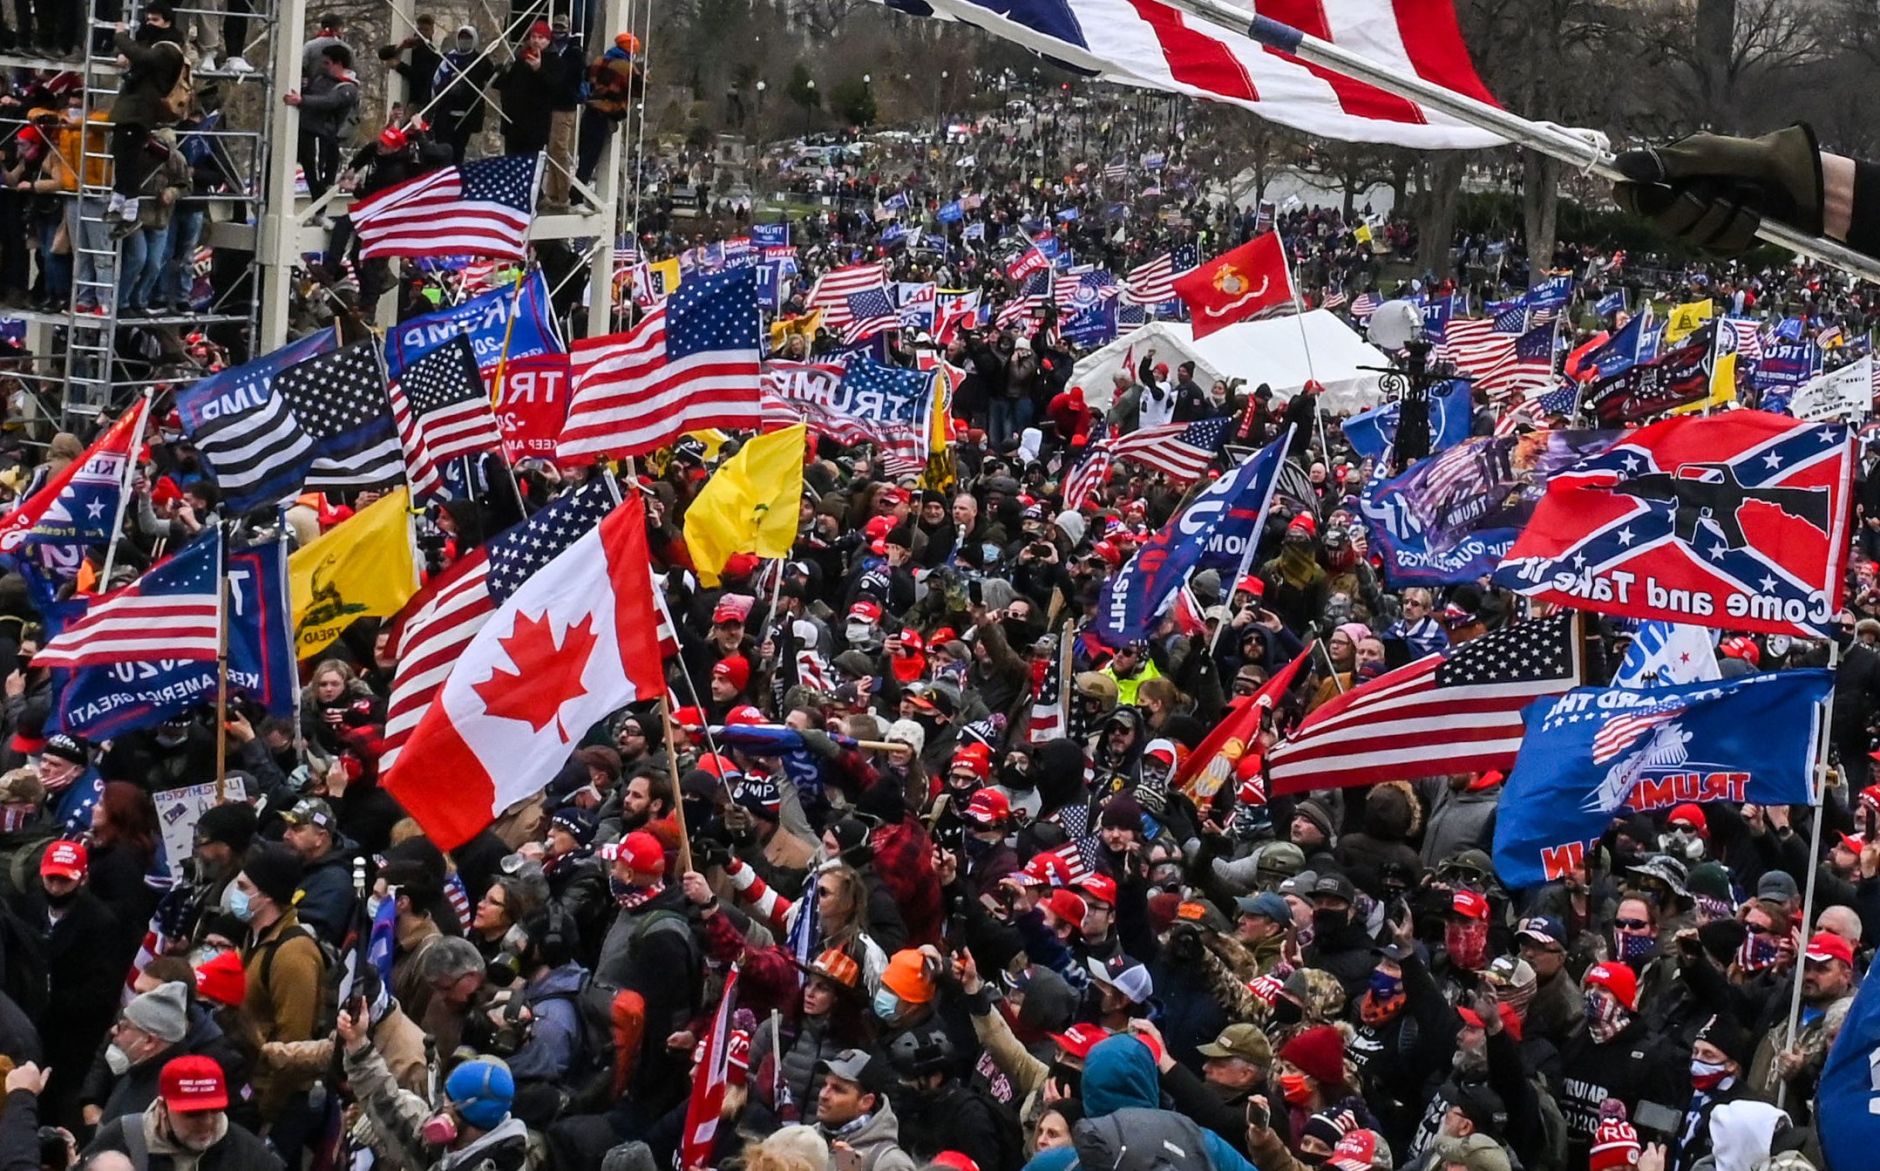 A photo of the crowd of rioters from January 6th. Many flags are visible, including one confederate flag emblazoned with the silouhette of an AR-15 and the text "Come and Take It."